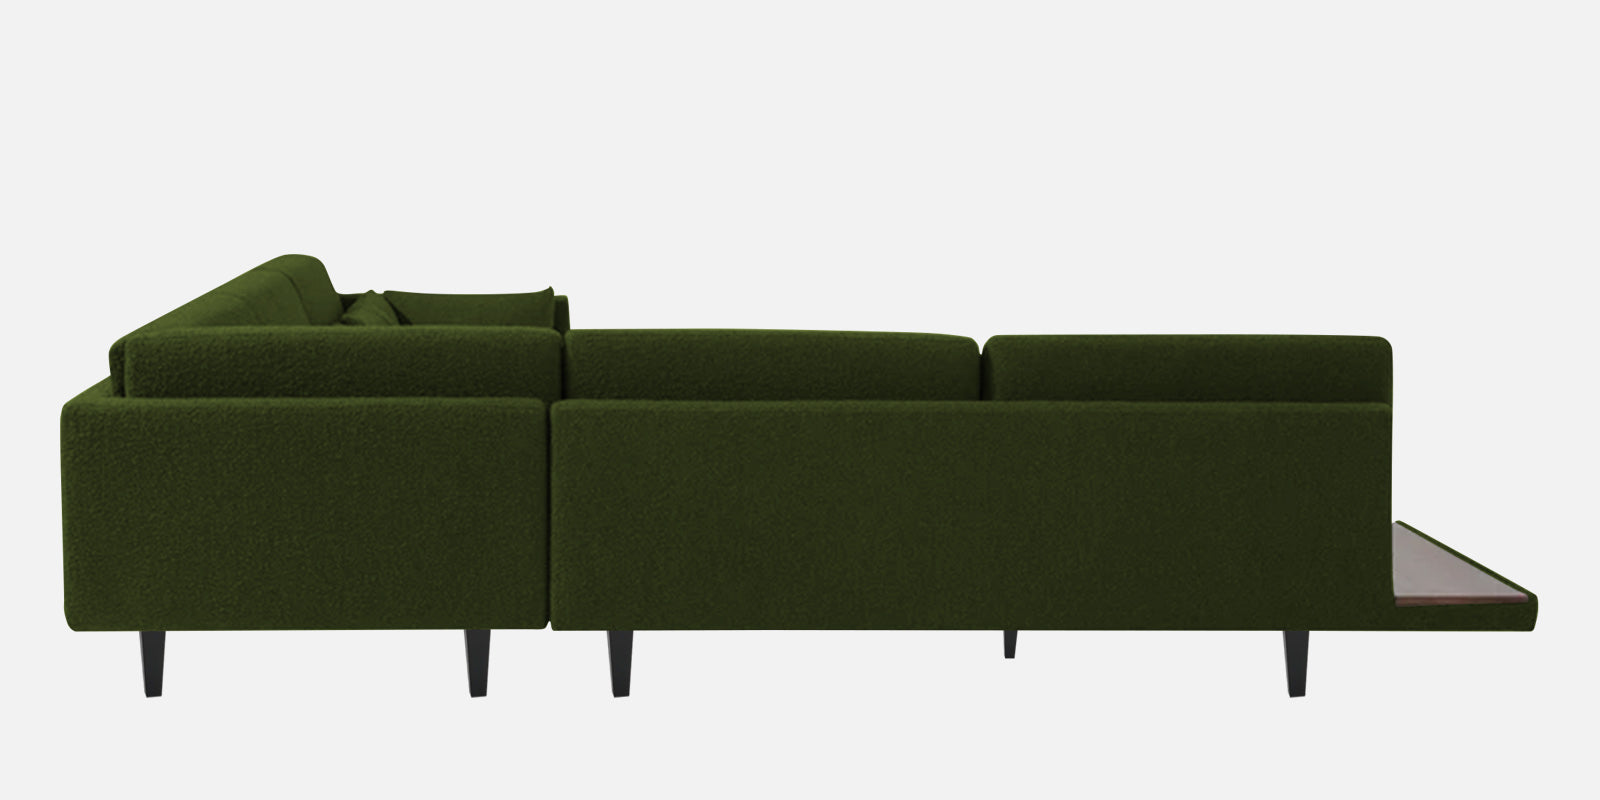 Malta Fabric 6 Seater RHS Sectional Sofa In Olive Green Colour